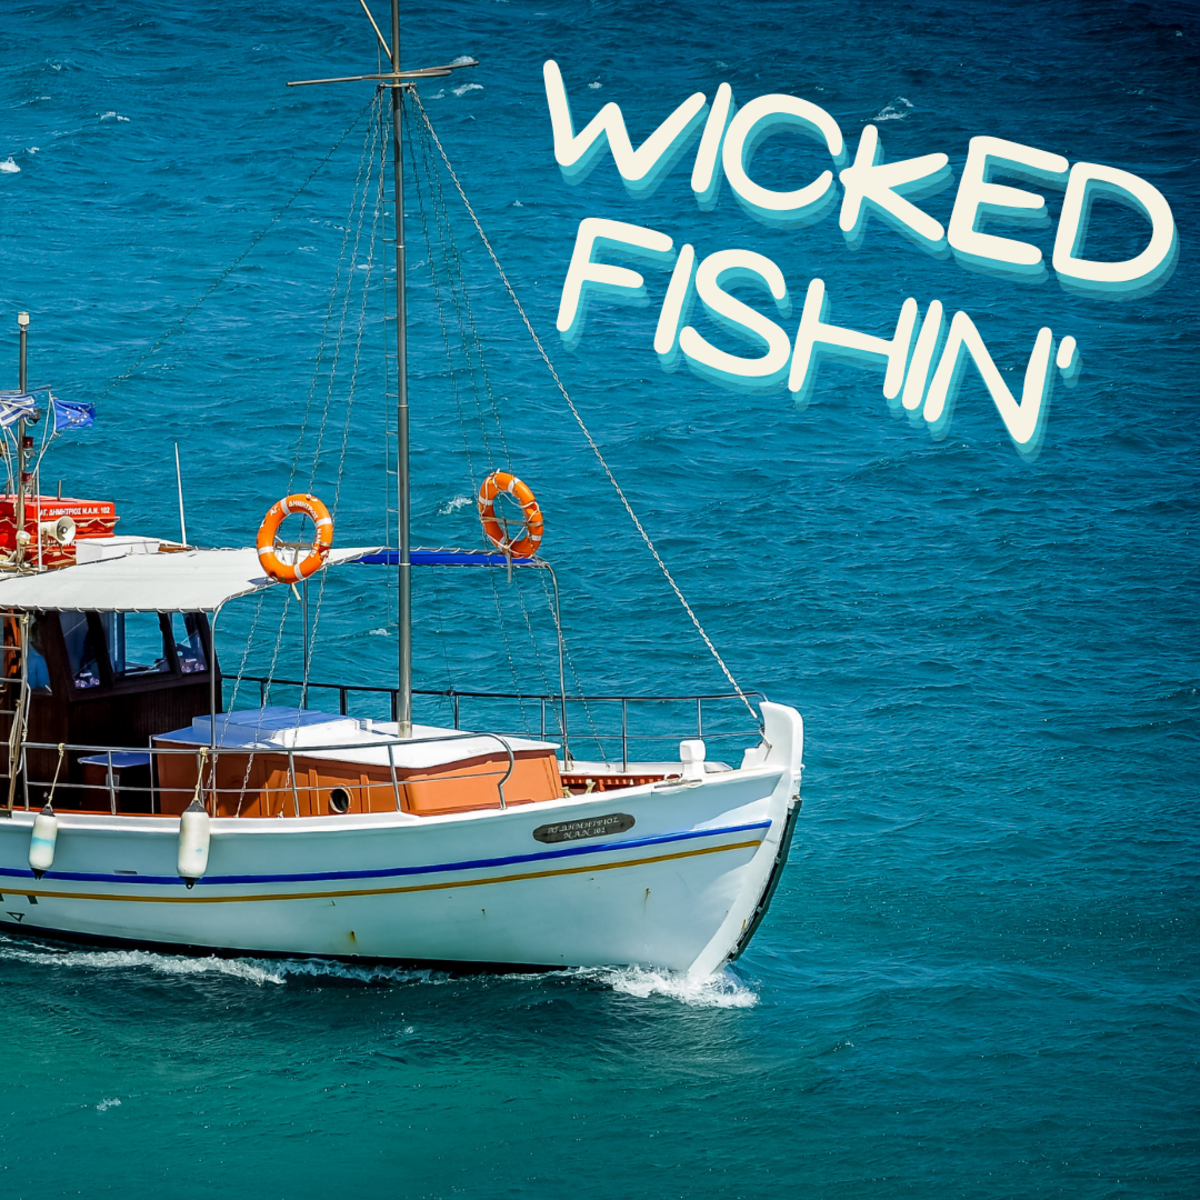 Looking for a cool boat name to impress your buddies? Check out these awesome examples for inspiration!